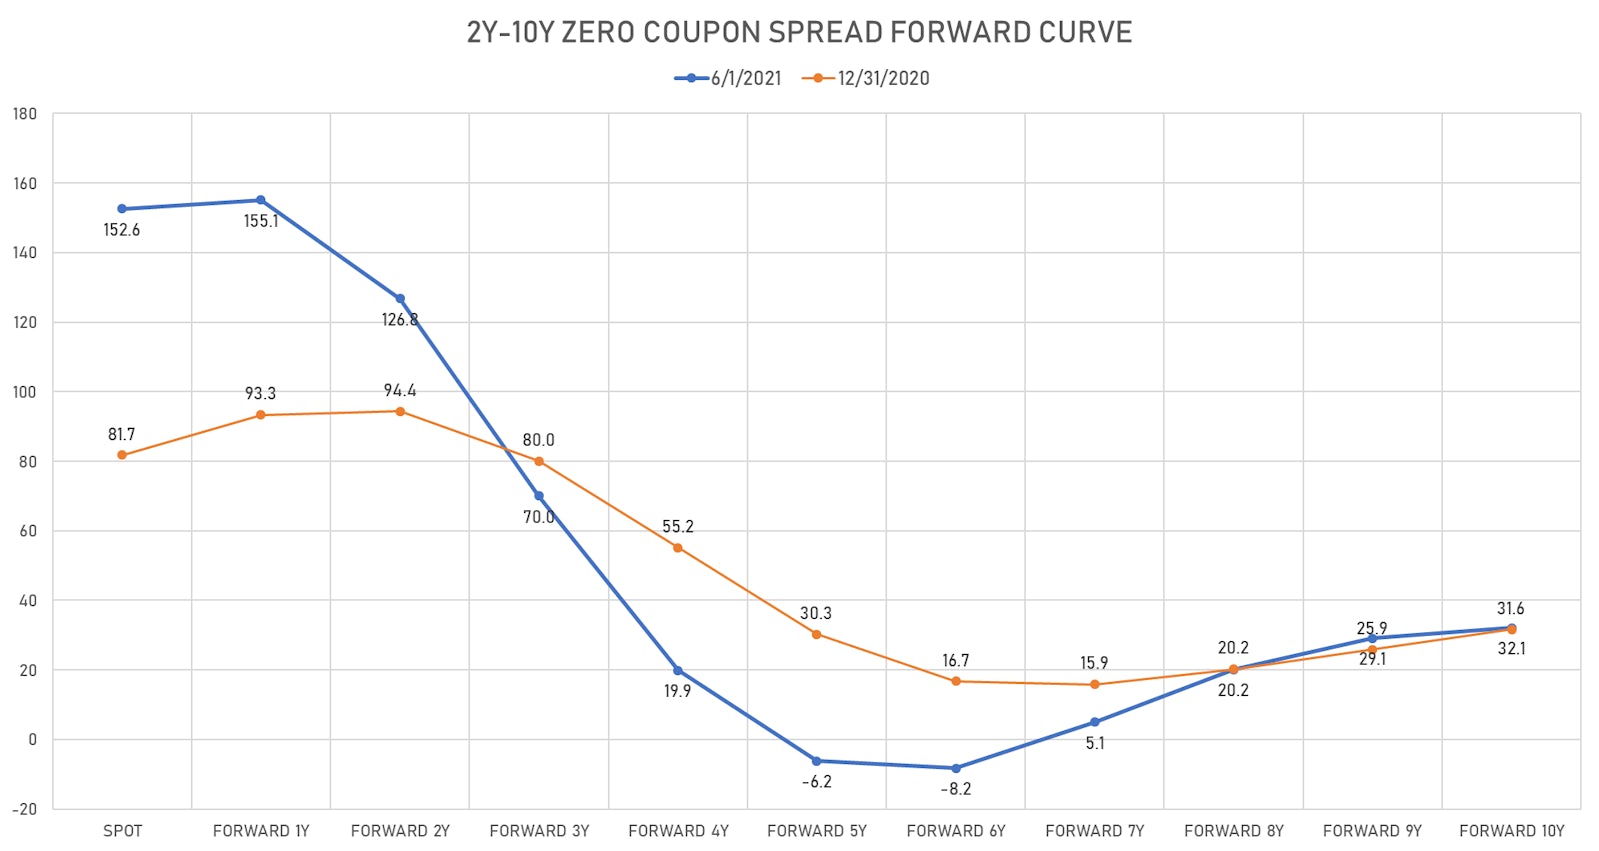 US 2-10 Spot curve steepens While the 5 Years Forward Stays Inverted | Sources: ϕpost, Refinitiv data